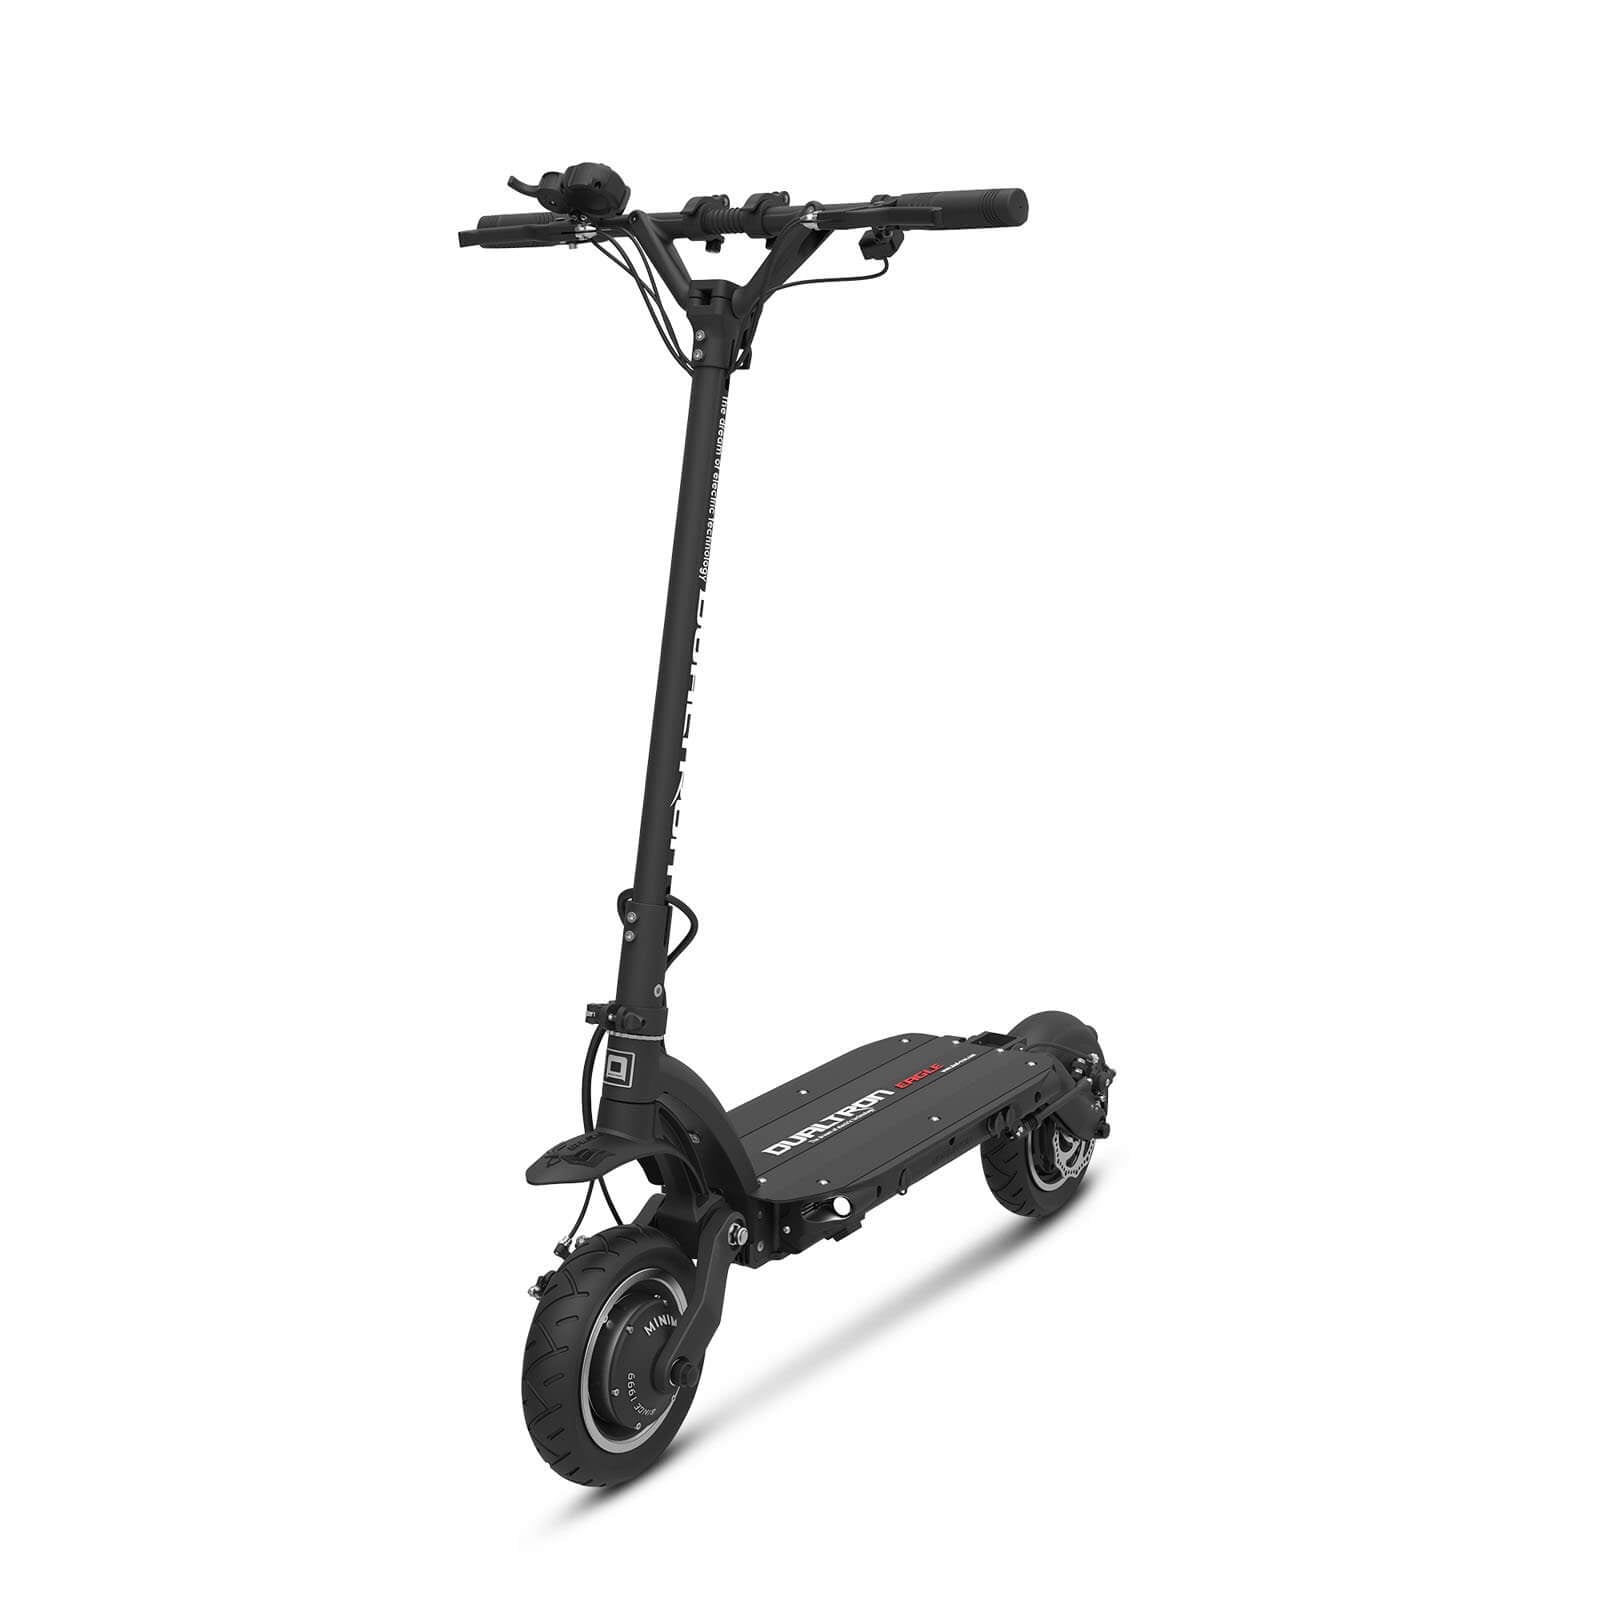 Refurbished Dualtron Eagle Pro Electric Scooter